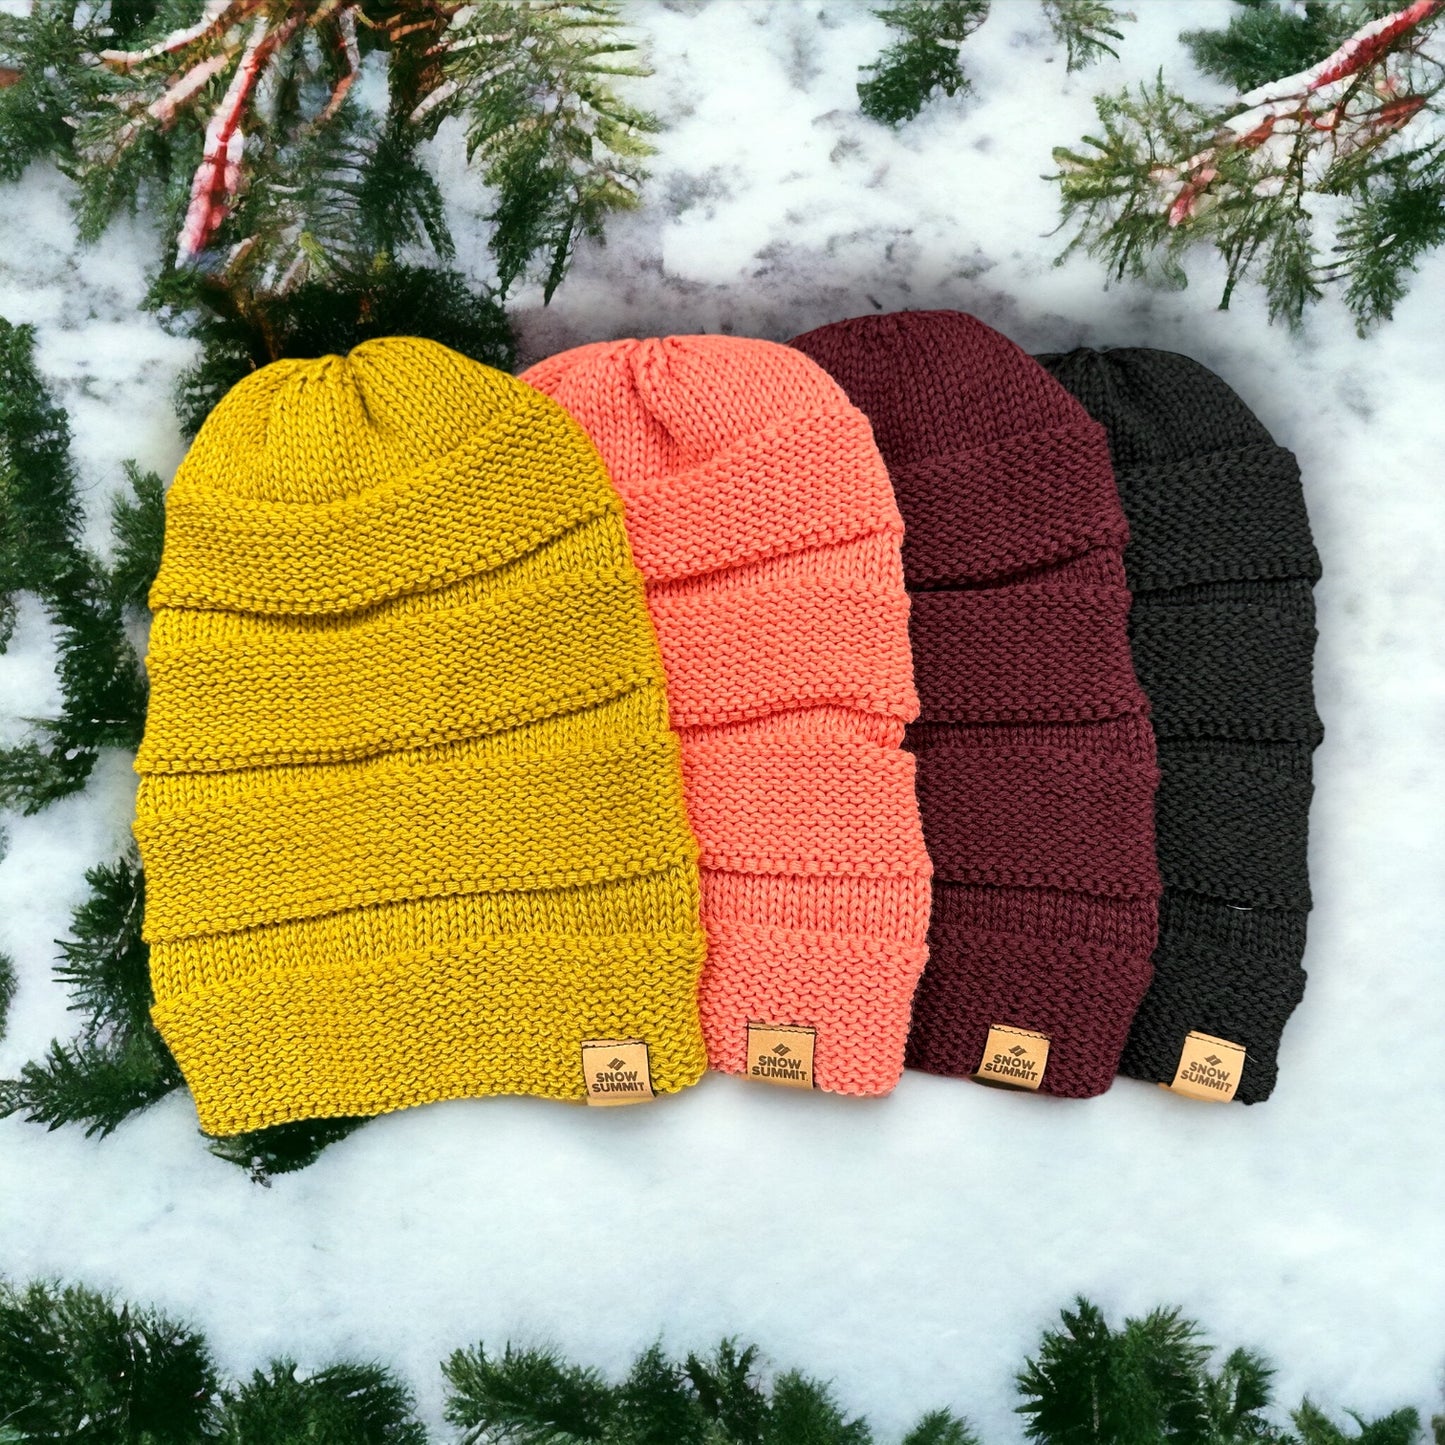 Snow Summit slouch beanies in colors: rust, coral, burgandy, and black